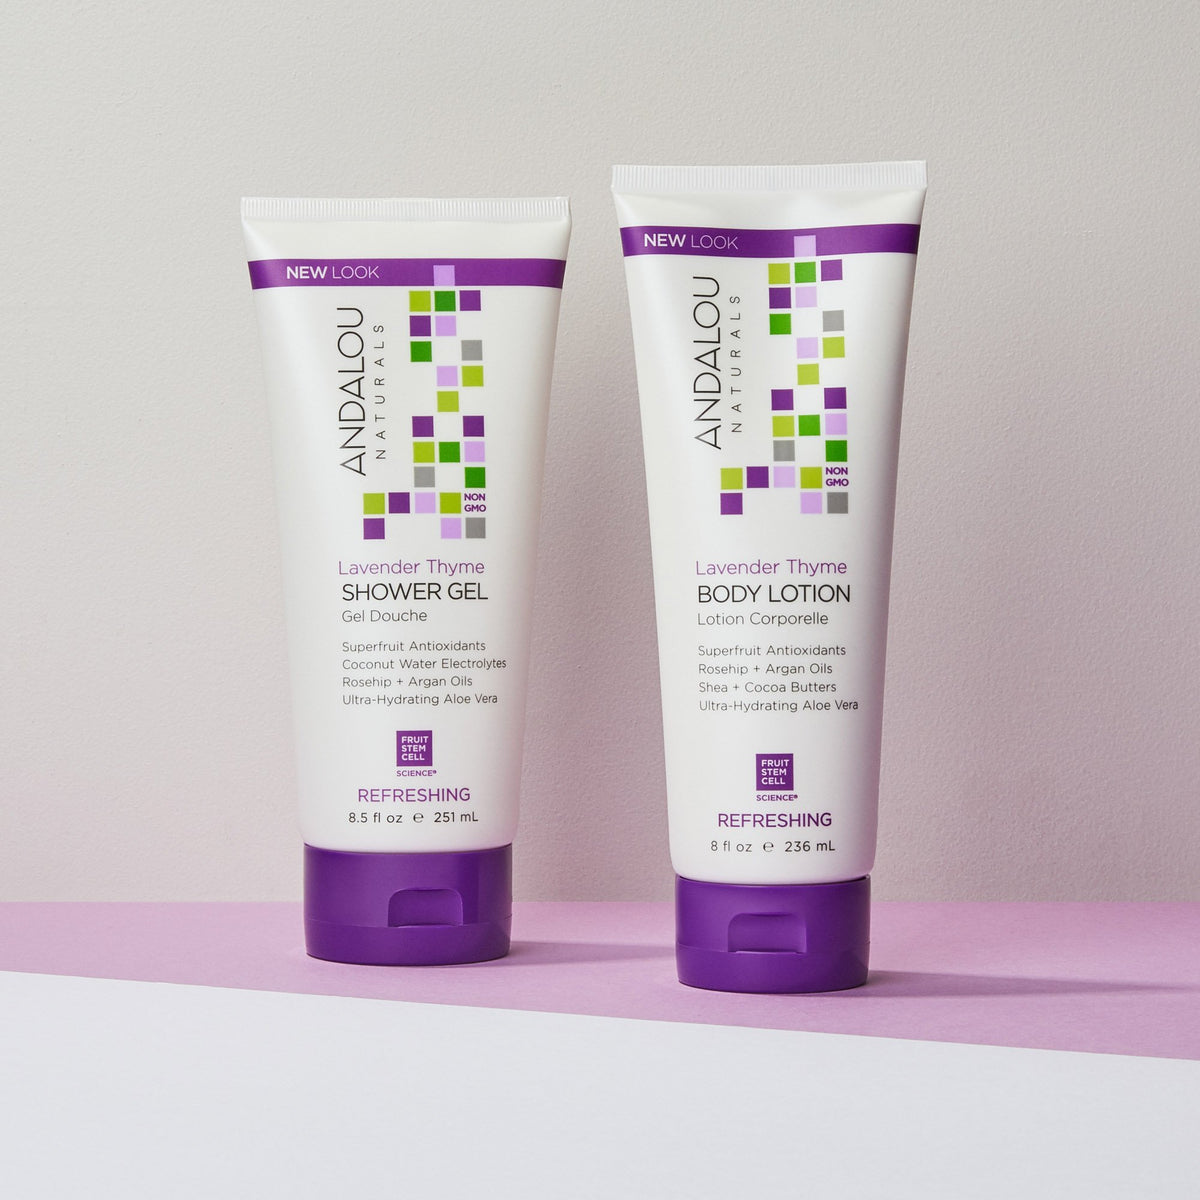 Lavender Thyme Refreshing Body Lotion - Andalou Naturals US